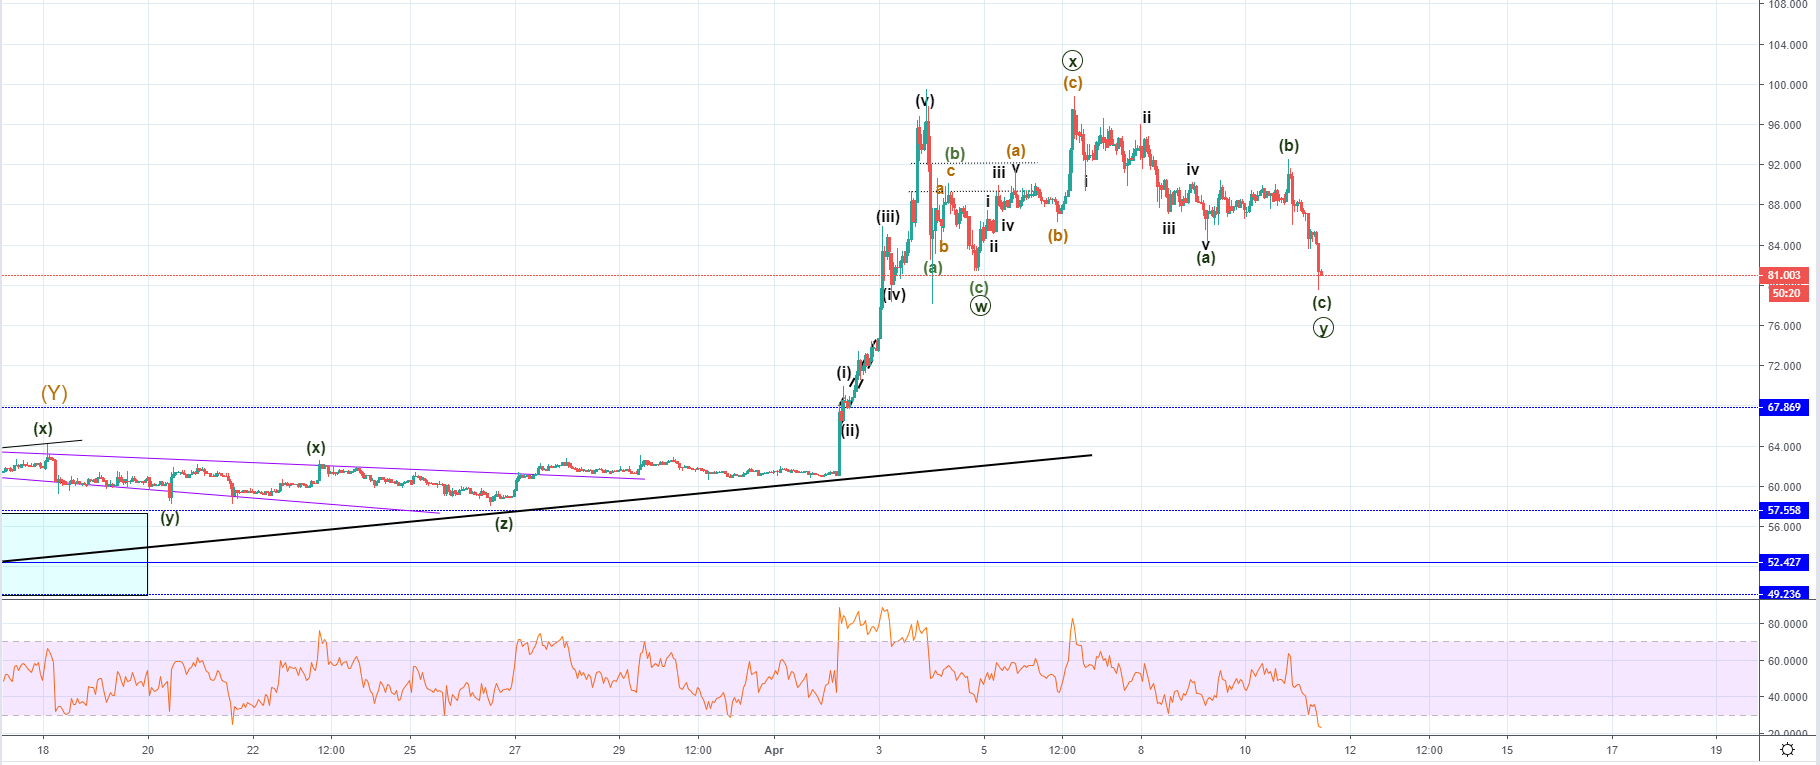 LTC/USD and EOS/USD in a corrective downward move